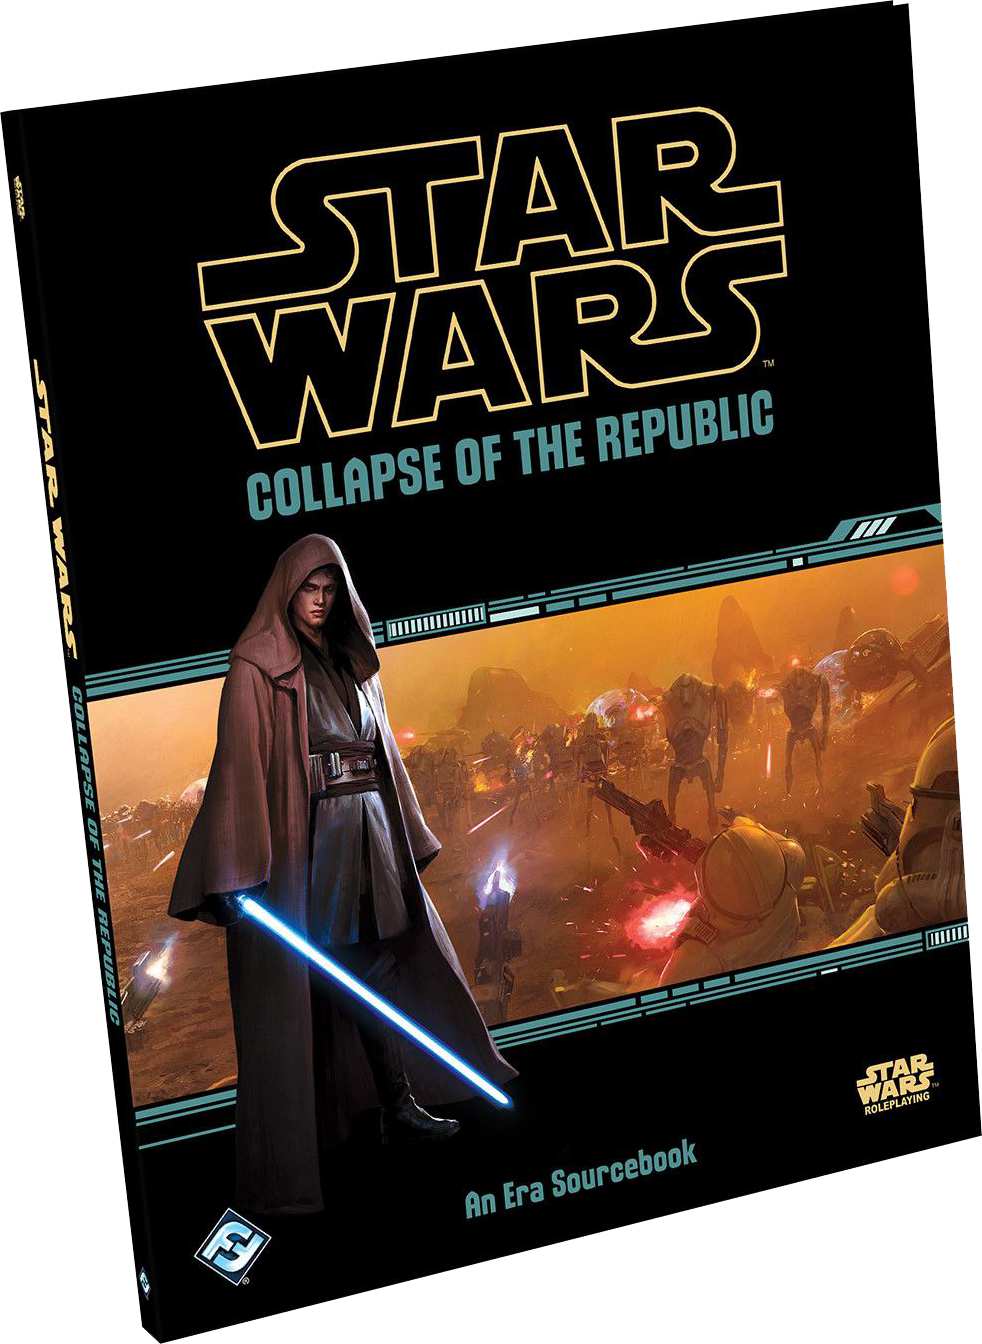 Collapse of the Republic (Star Wars RPG)